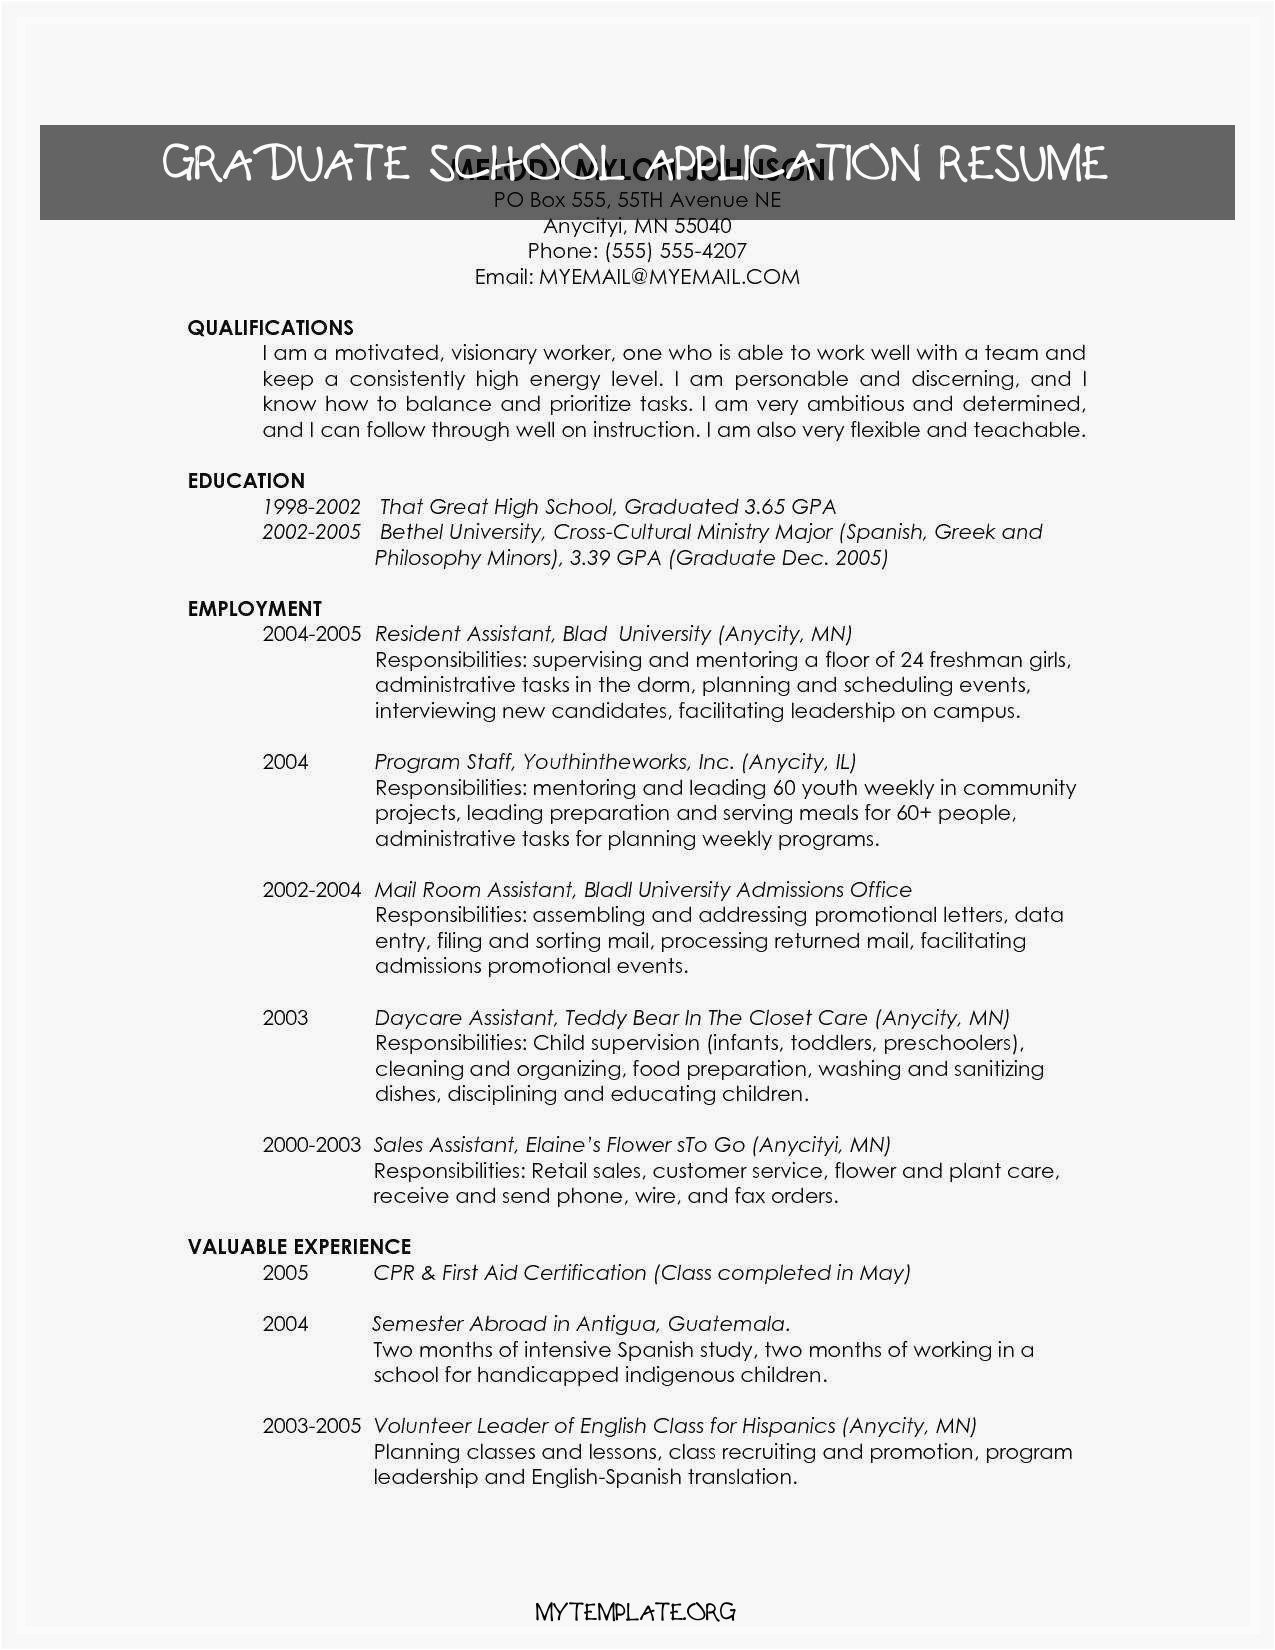 Graduate Student Resume for Masters Application Sample Resume Template for Masters Application